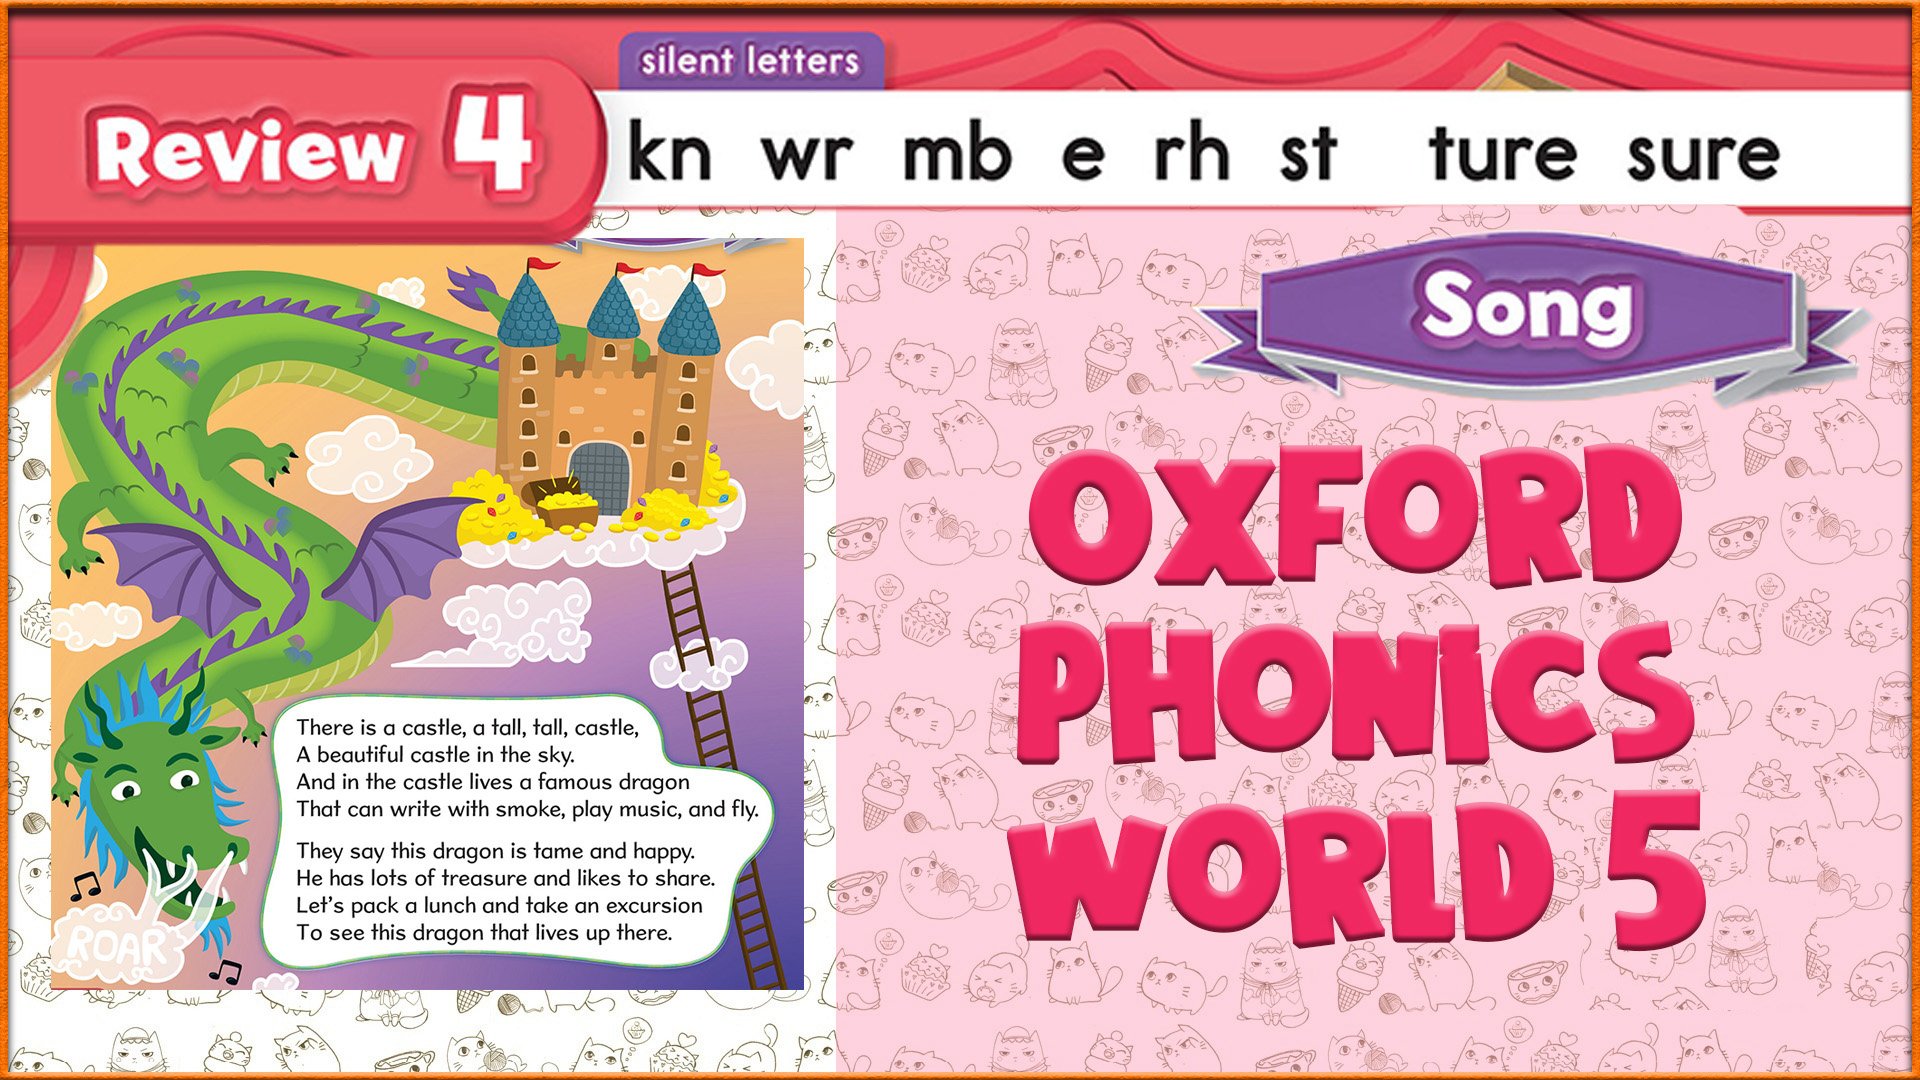 Song | Review 4 | Oxford Phonics World 5 - Consonant Blends. #58